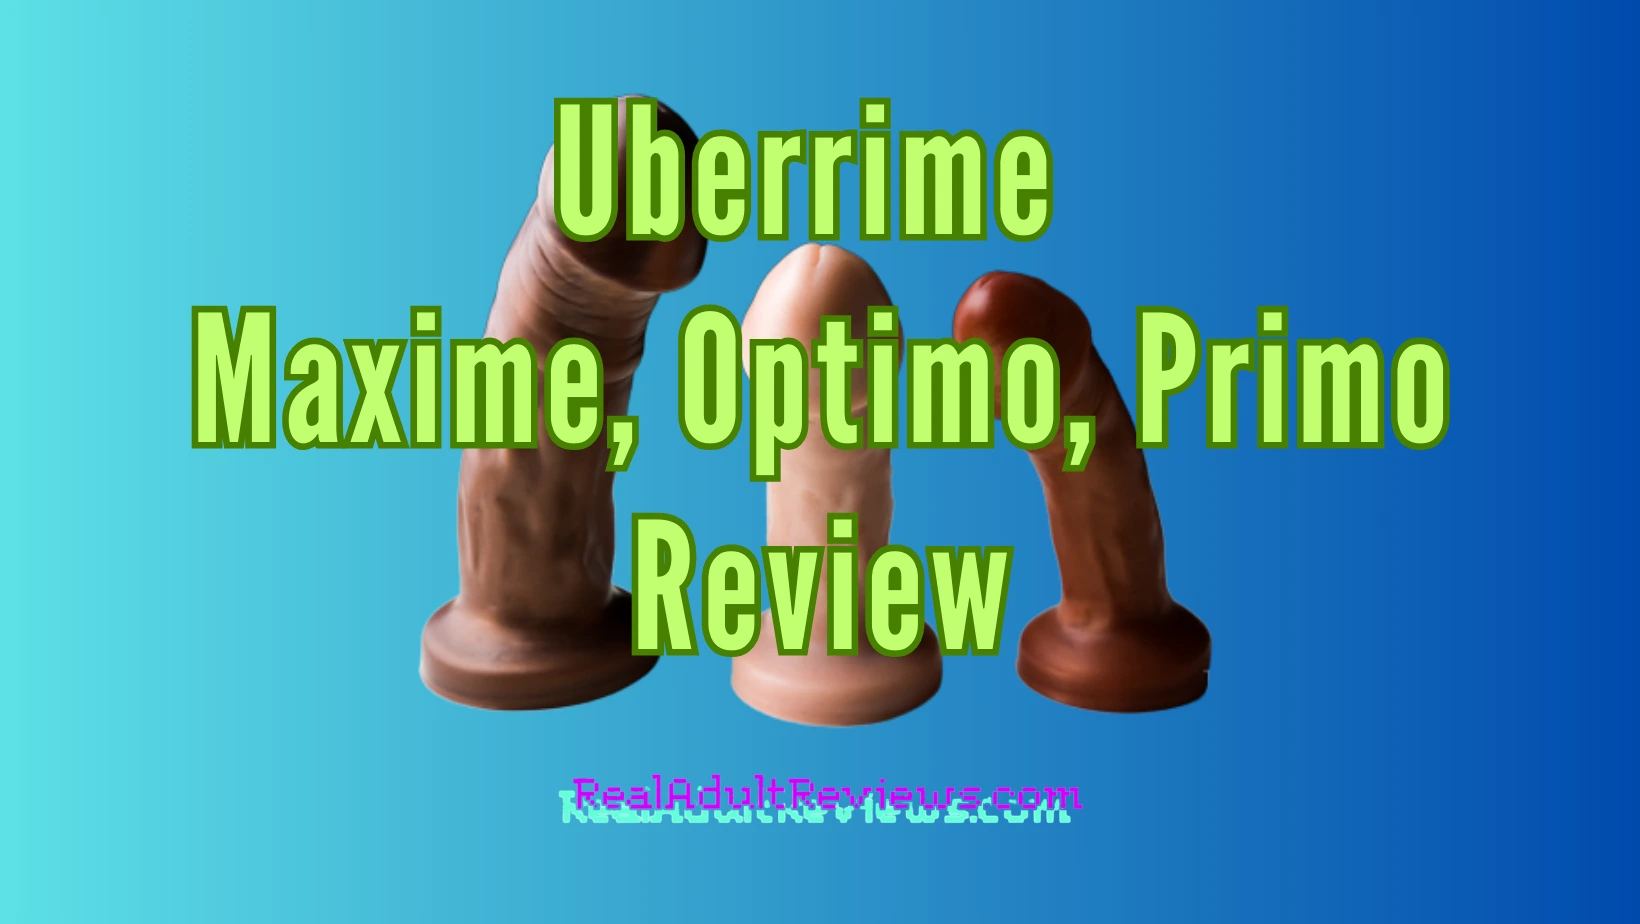 Are You a Fan of Realistic Dildos? Uberrime Maxime, Optimo, and Primo Review